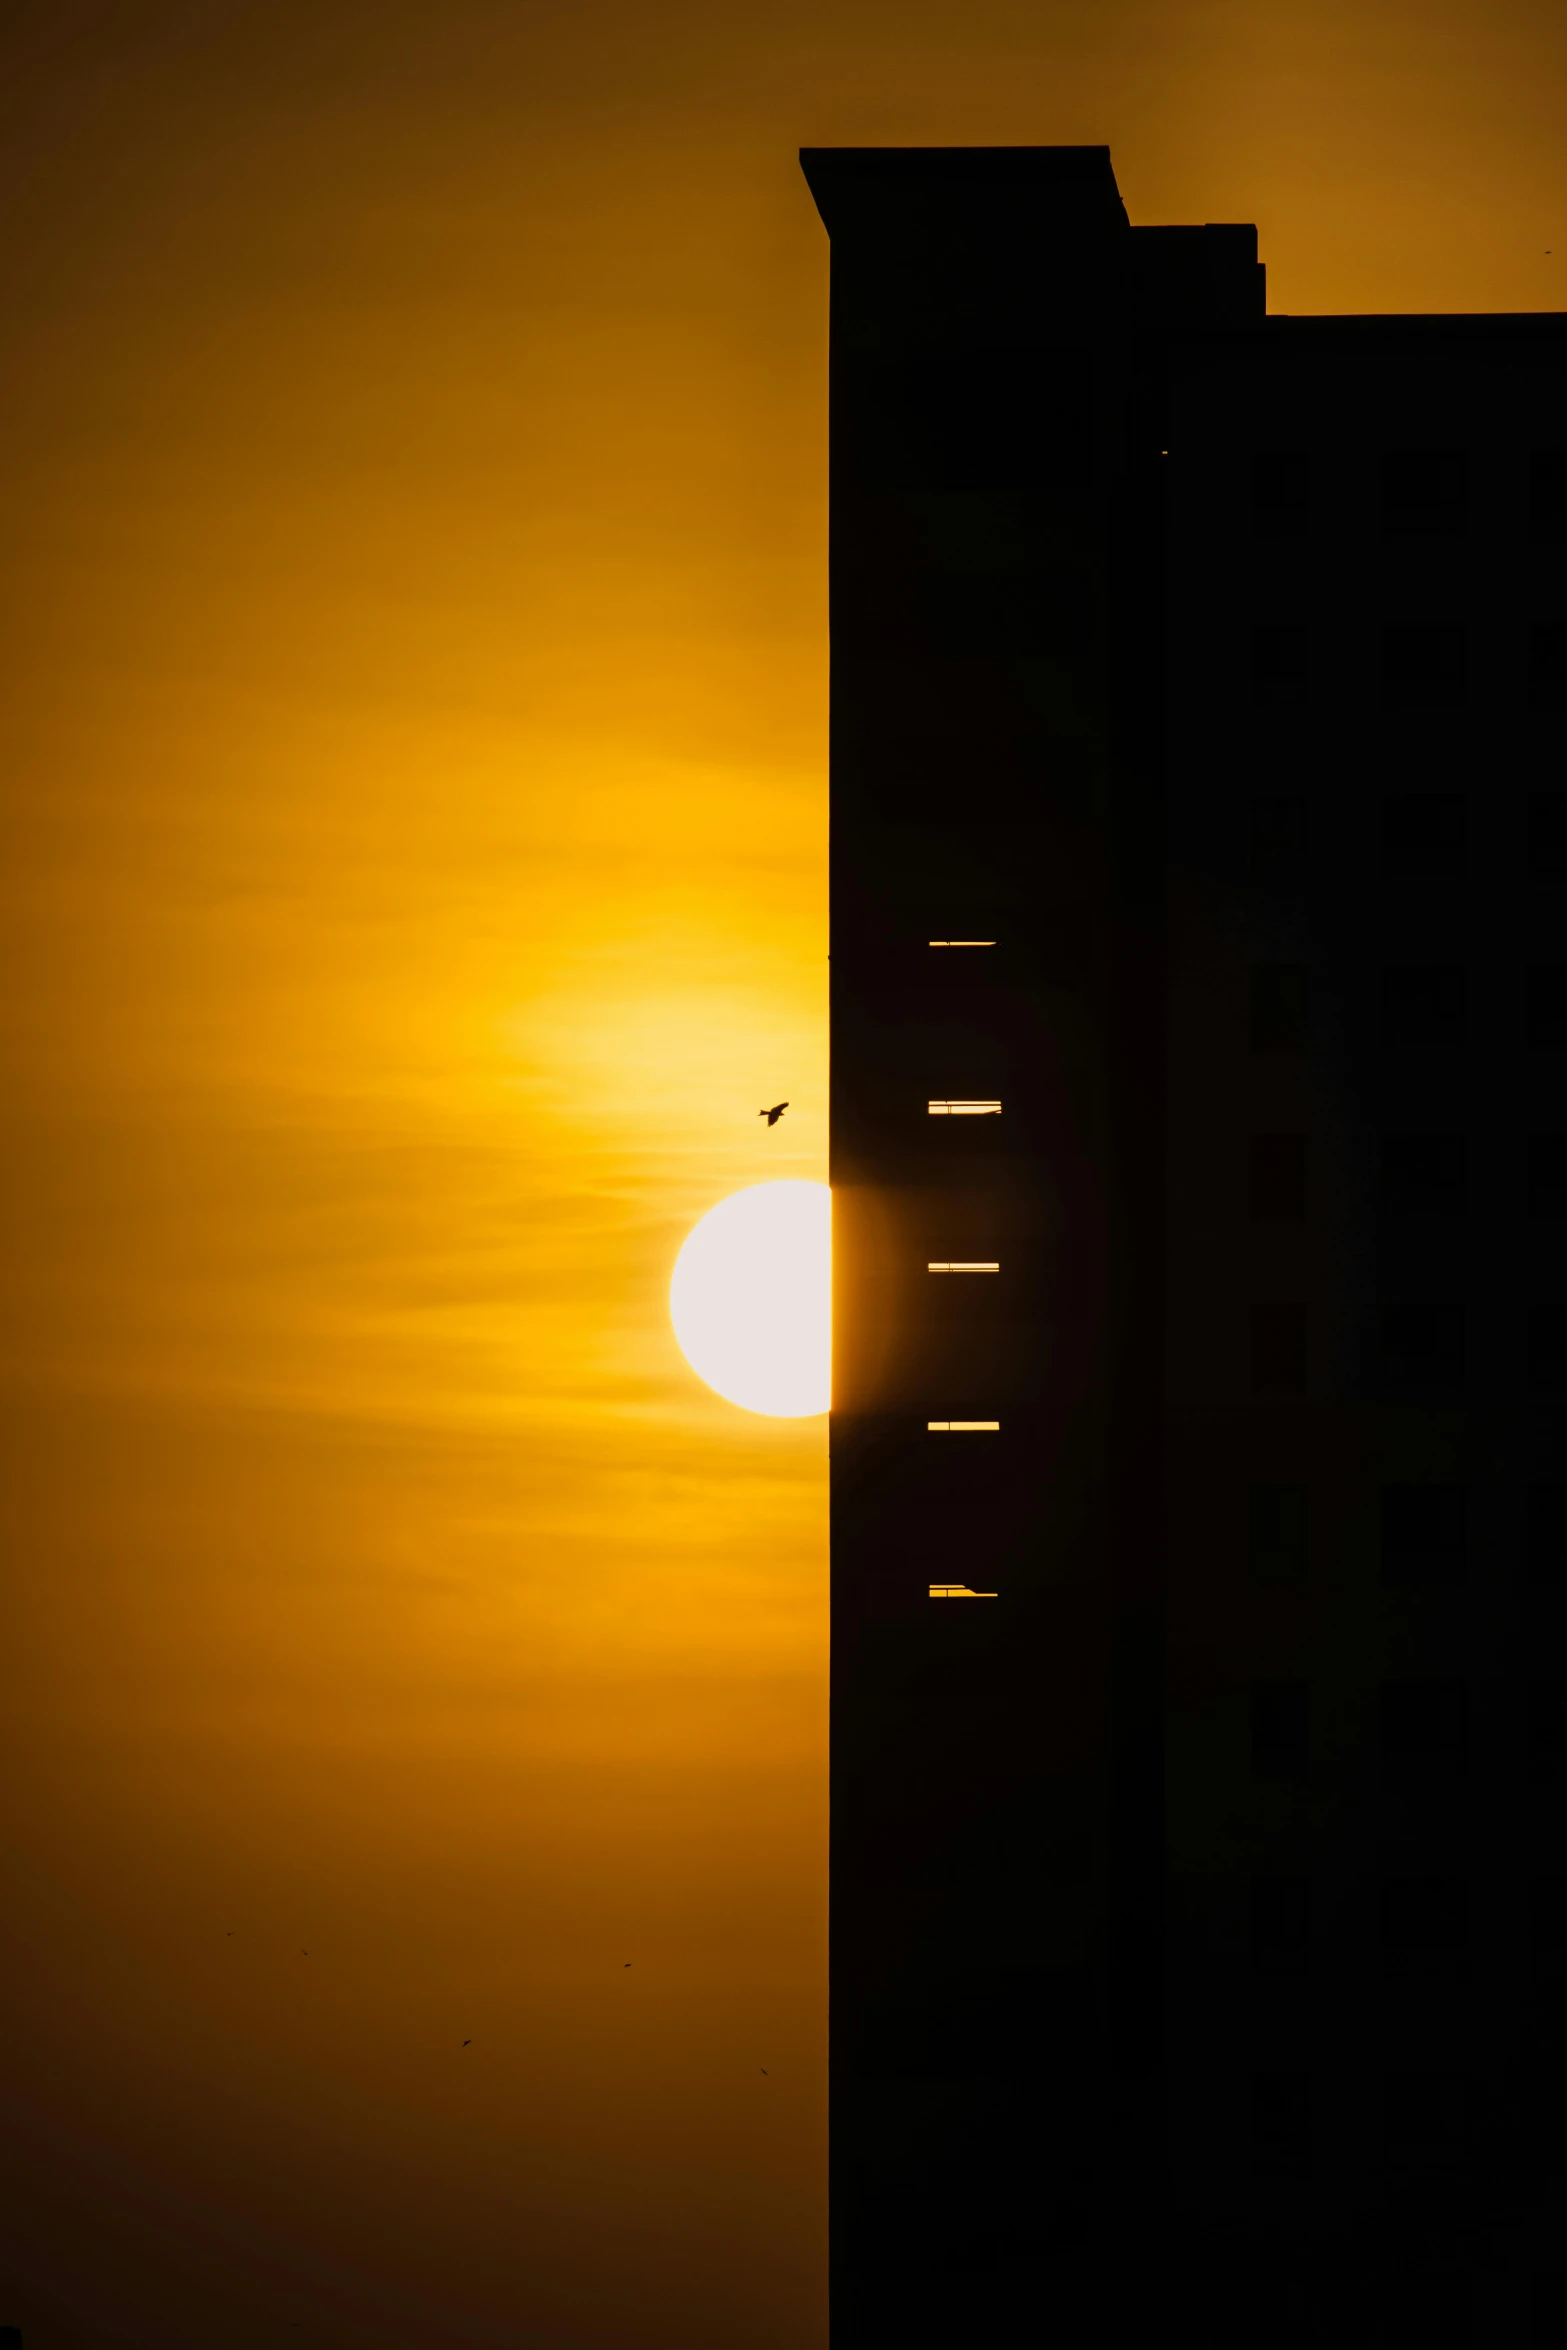 the silhouette of a building is seen with the sun in the distance